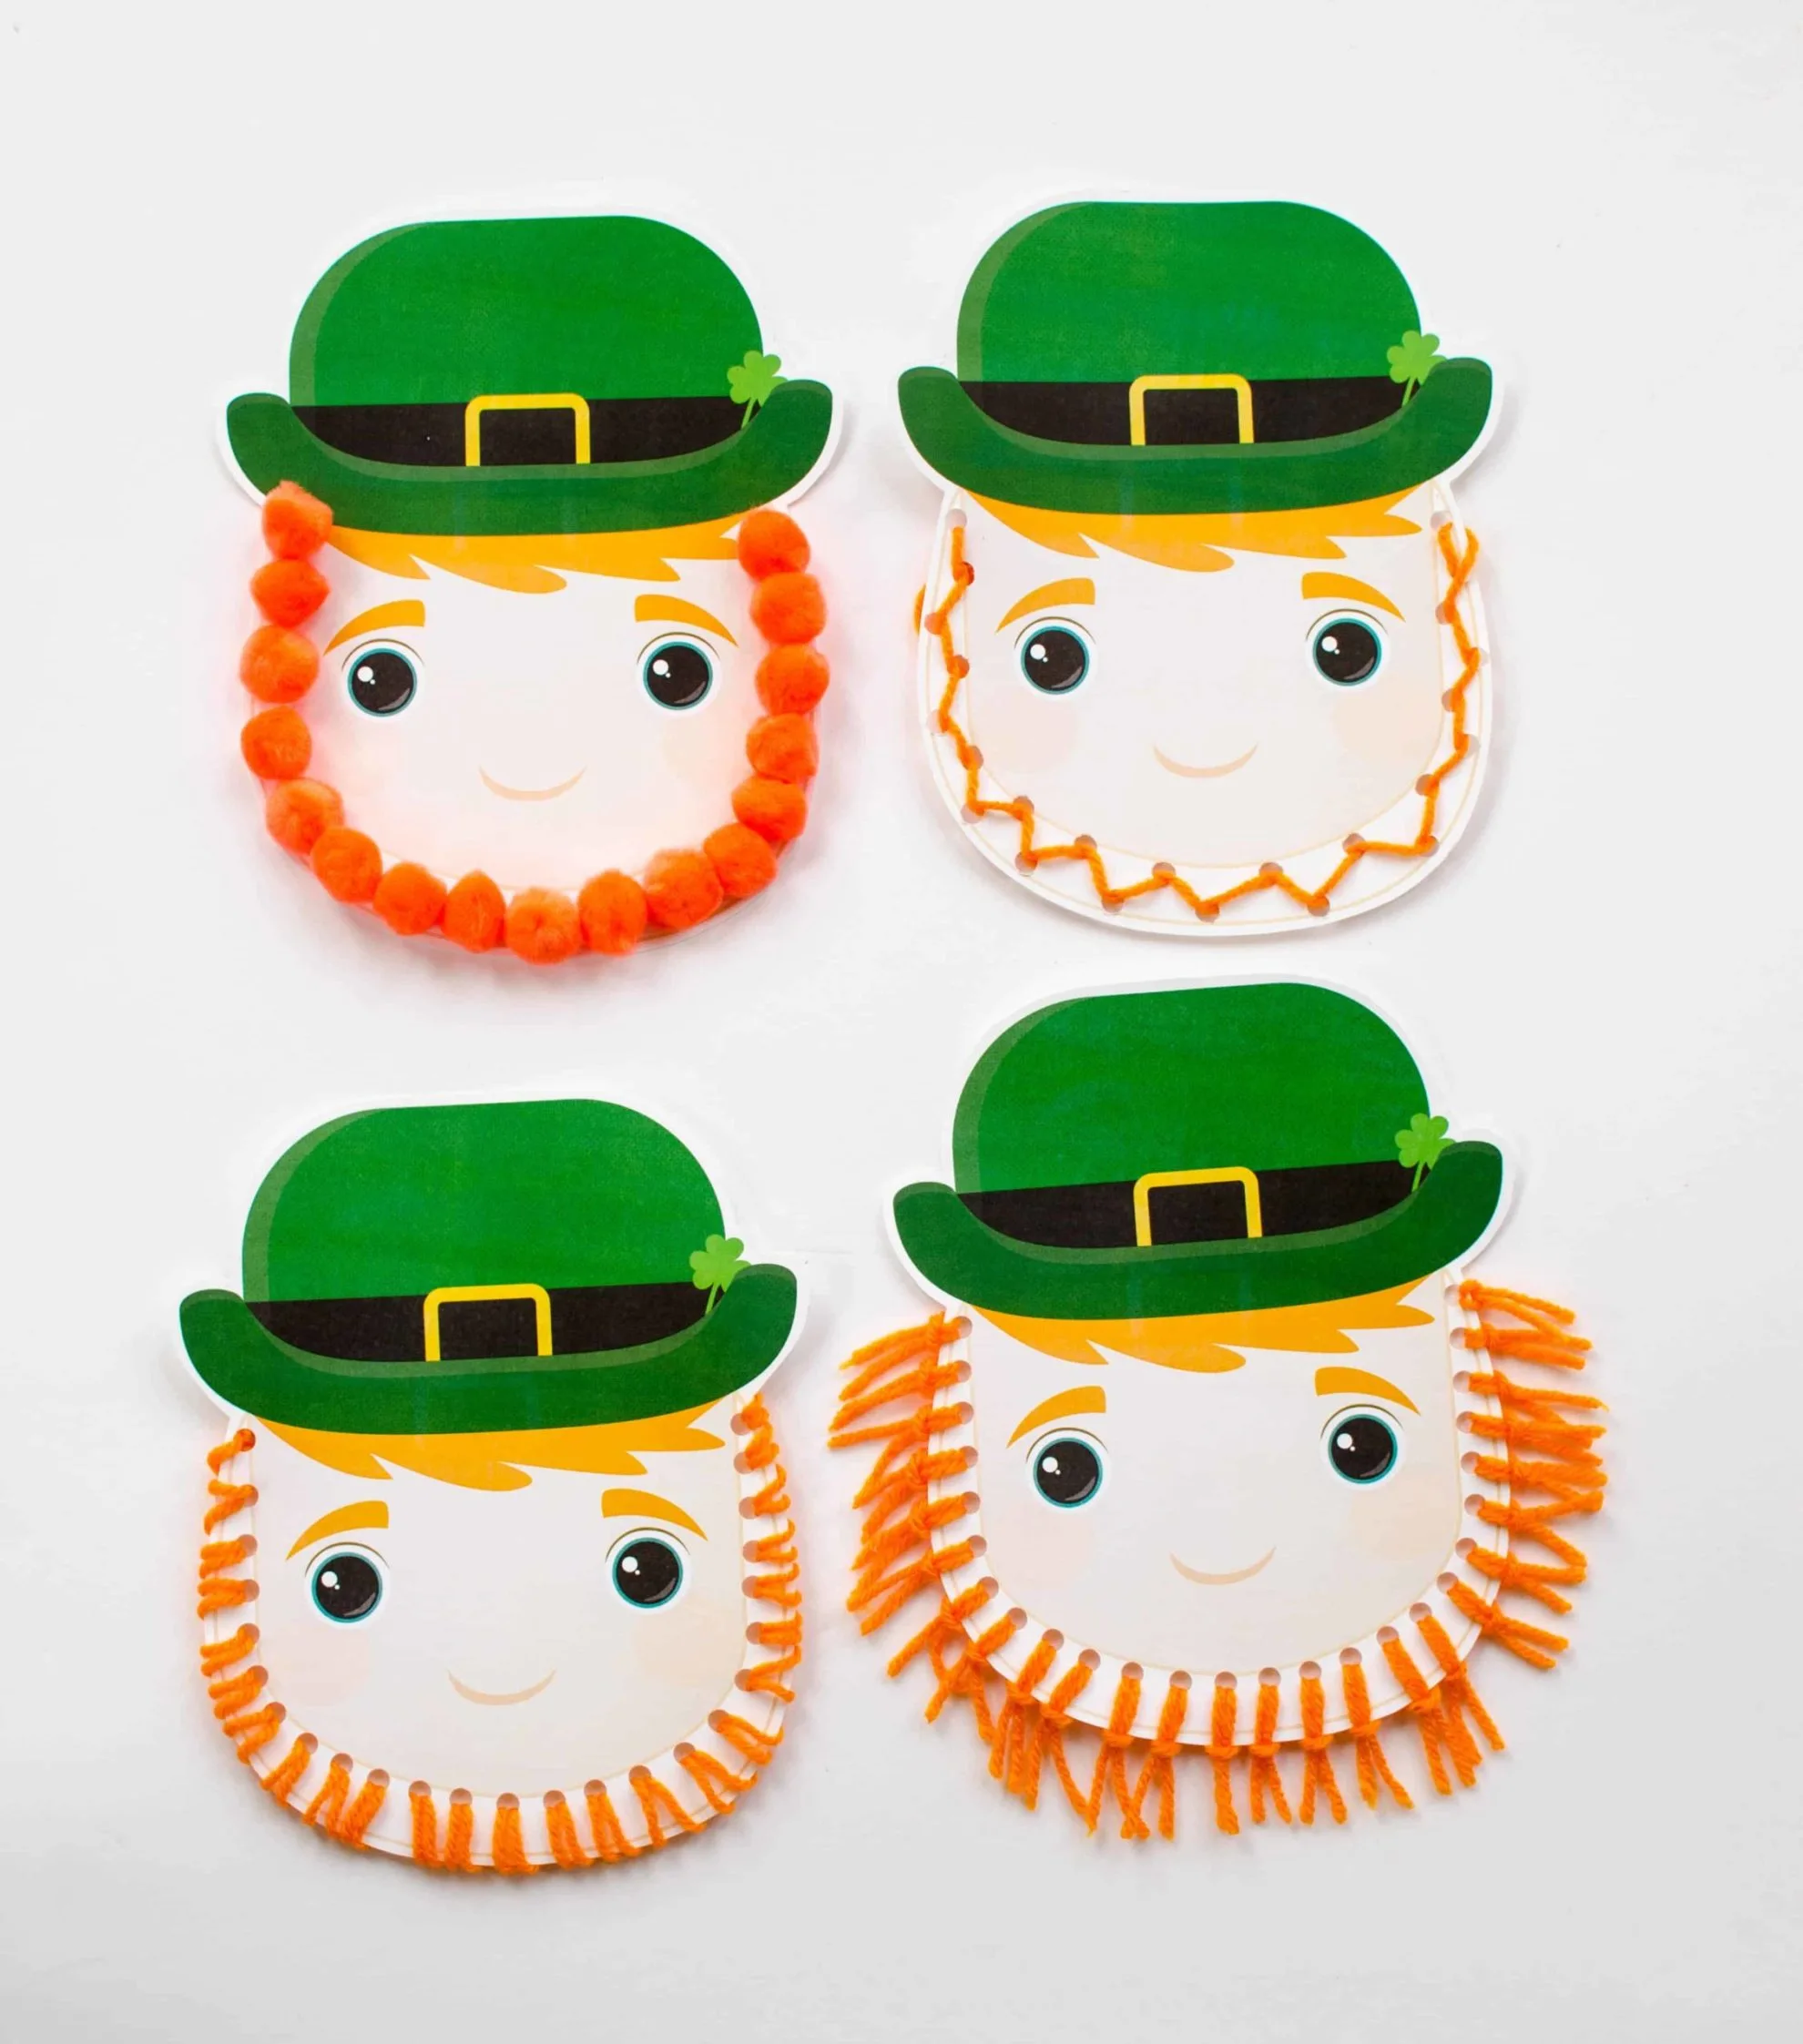 Use our free printable to create an easy leprechaun craft for kids.